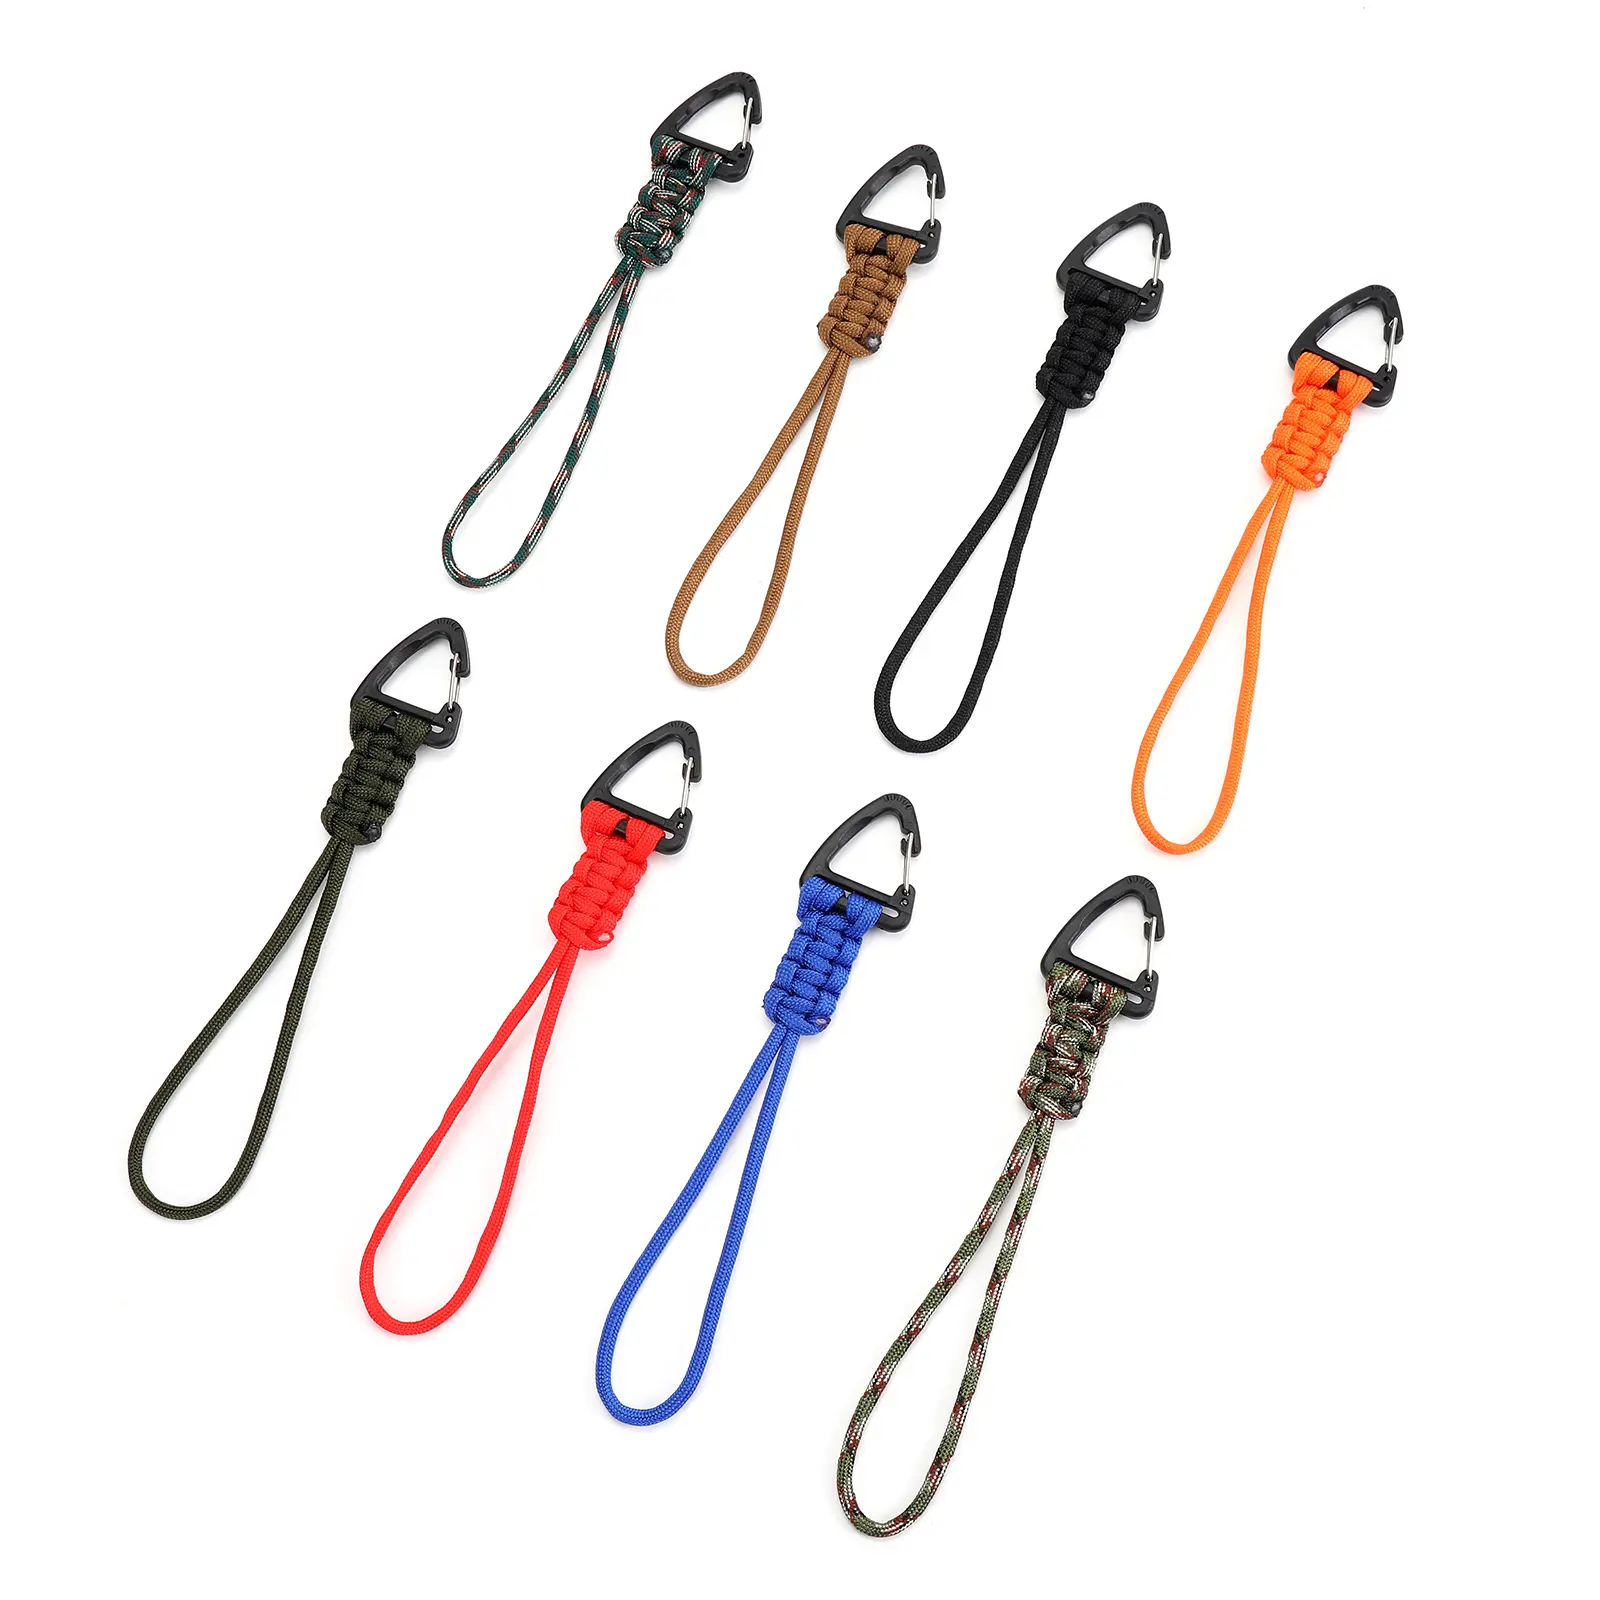 Triangle-Shaped Carabiner Keychain for Outdoor Activities and Camping